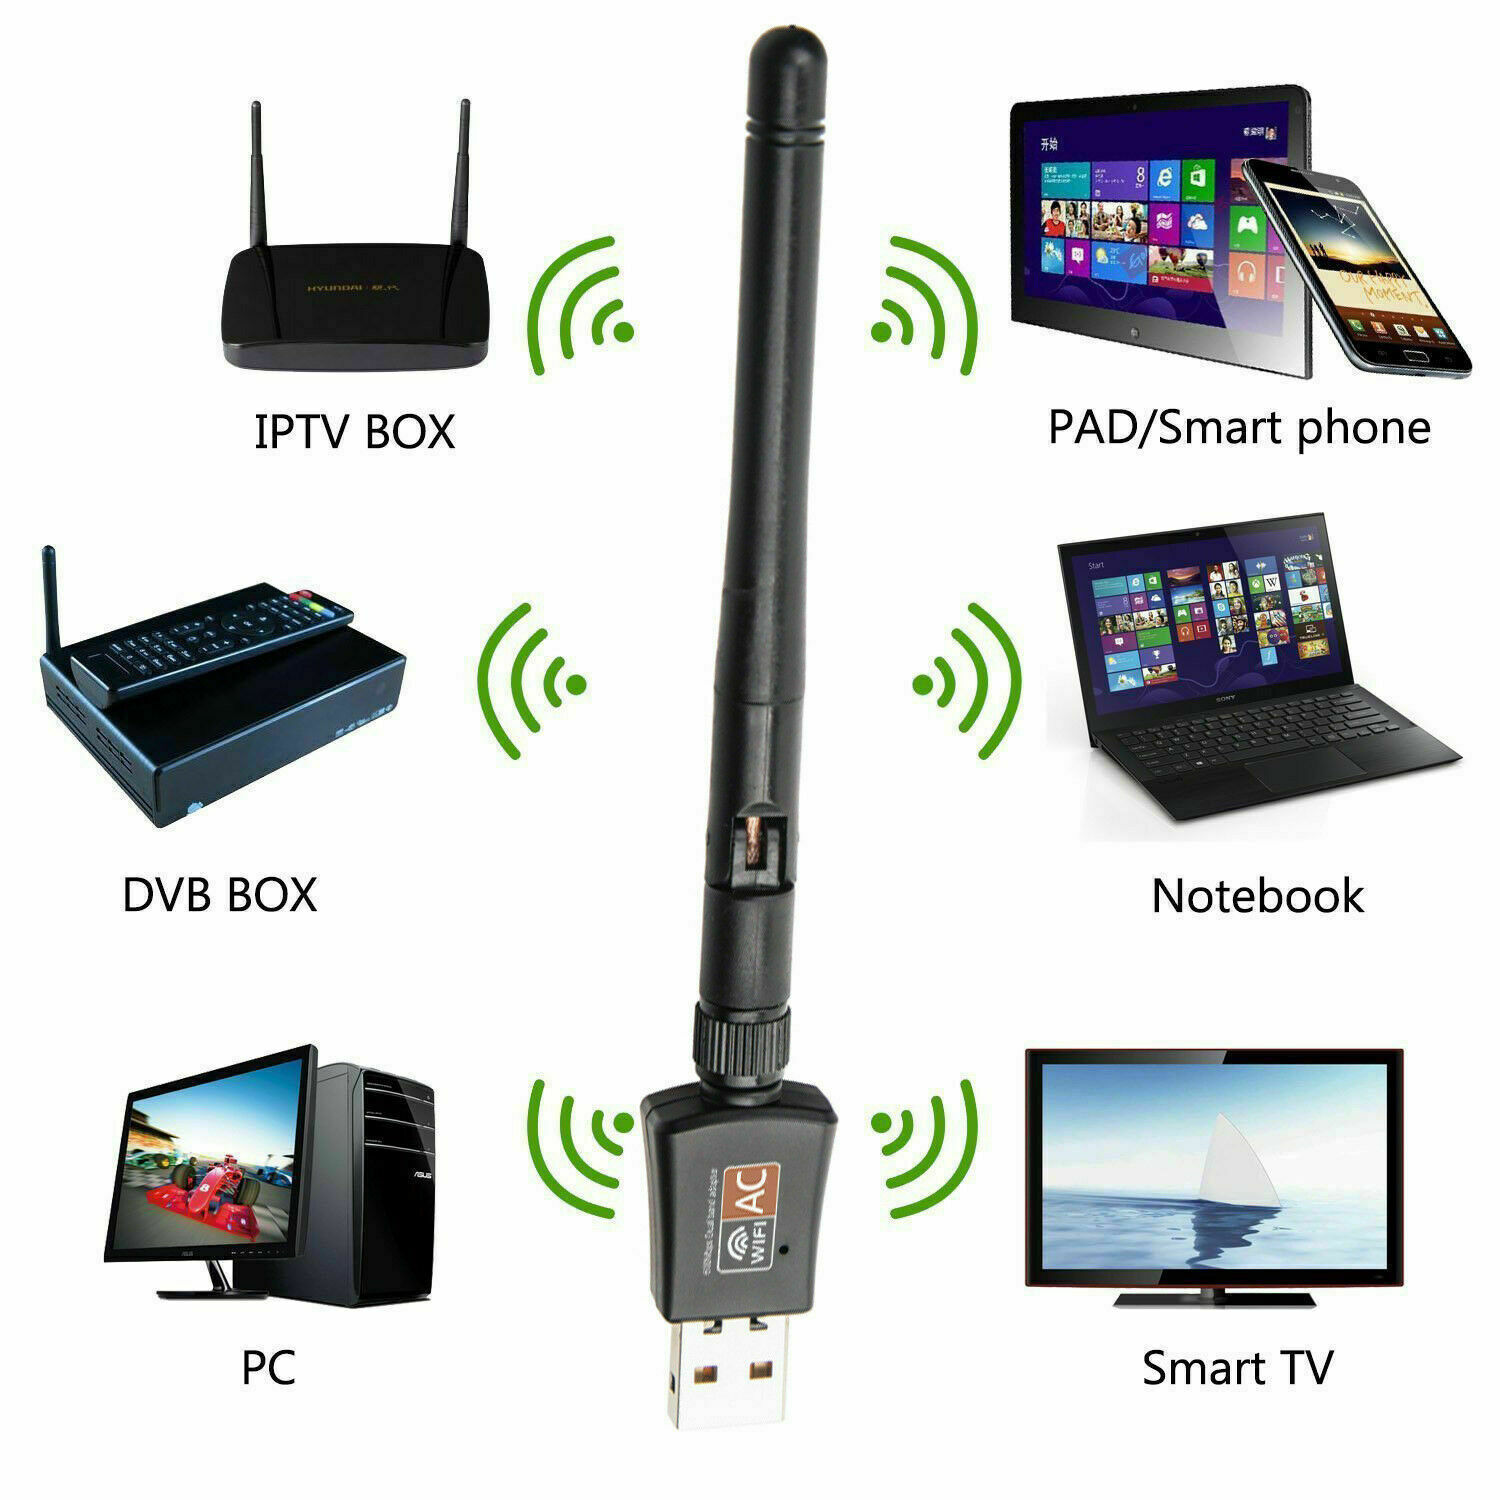 AC600 Mbps Dual Band 2.4/5Ghz Wireless Internet USB WiFi Network Antenna Adapter